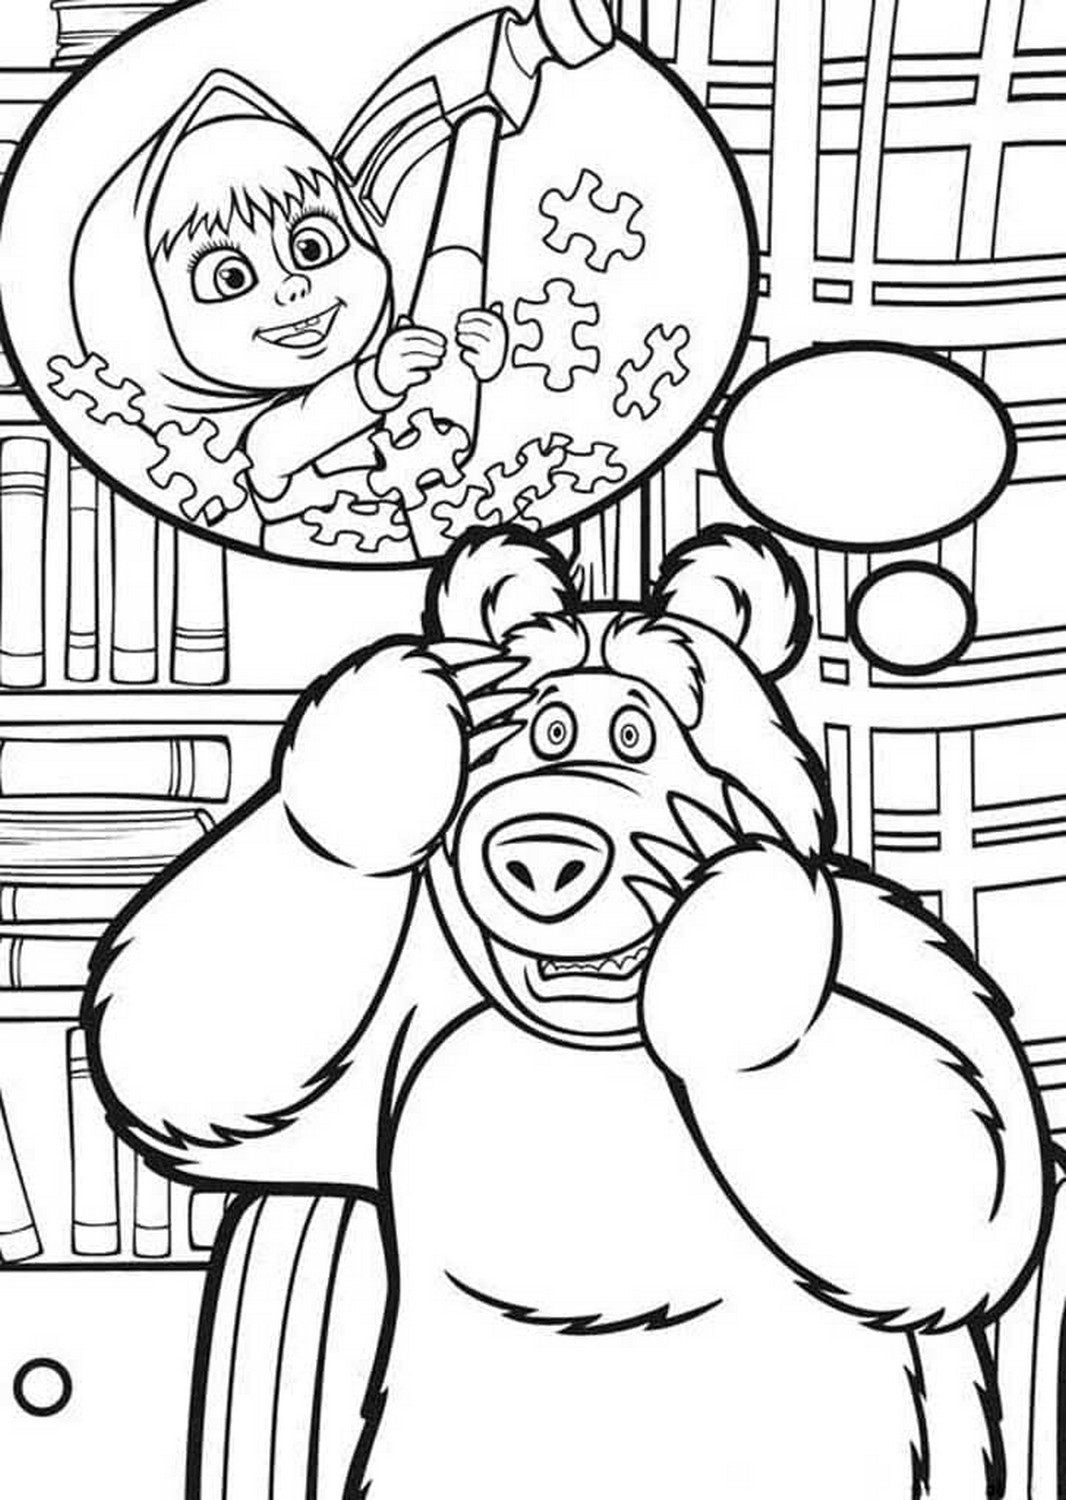 Masha and the Bear 98 drawing from Masha and the Bear to print and color